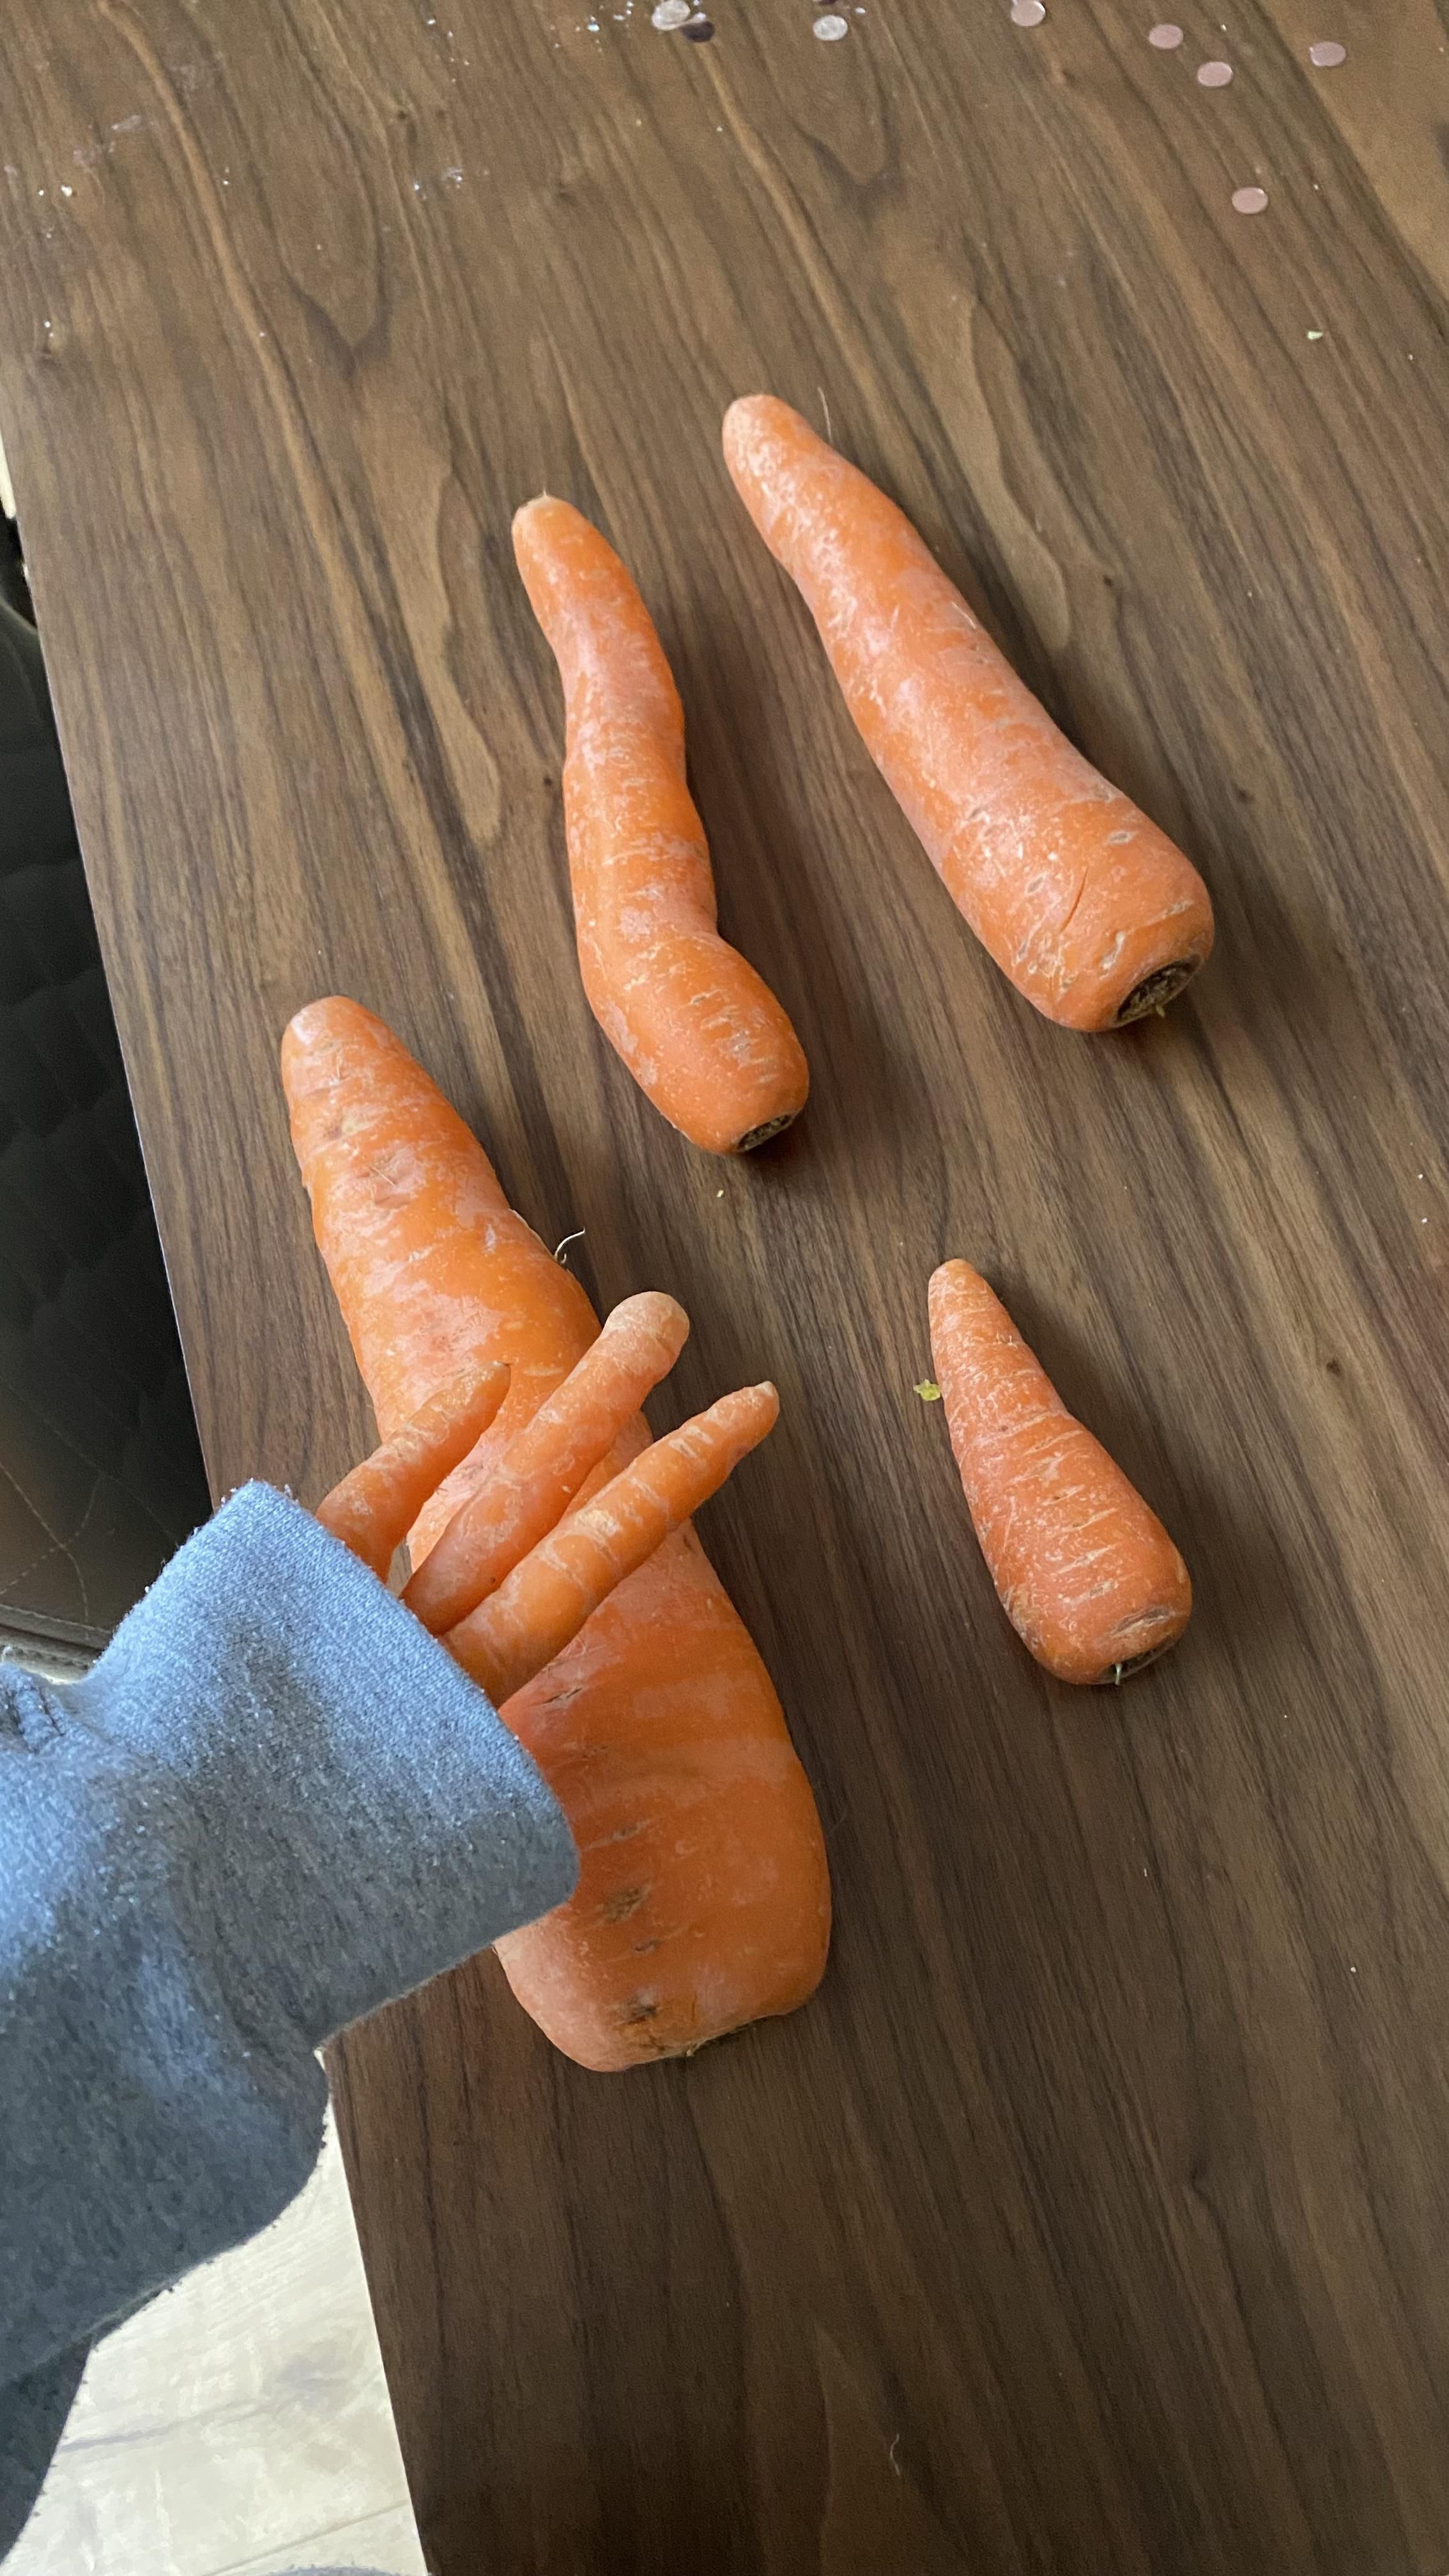 My carrot had 3 thingys in instead of one. Take my stronggg hand..